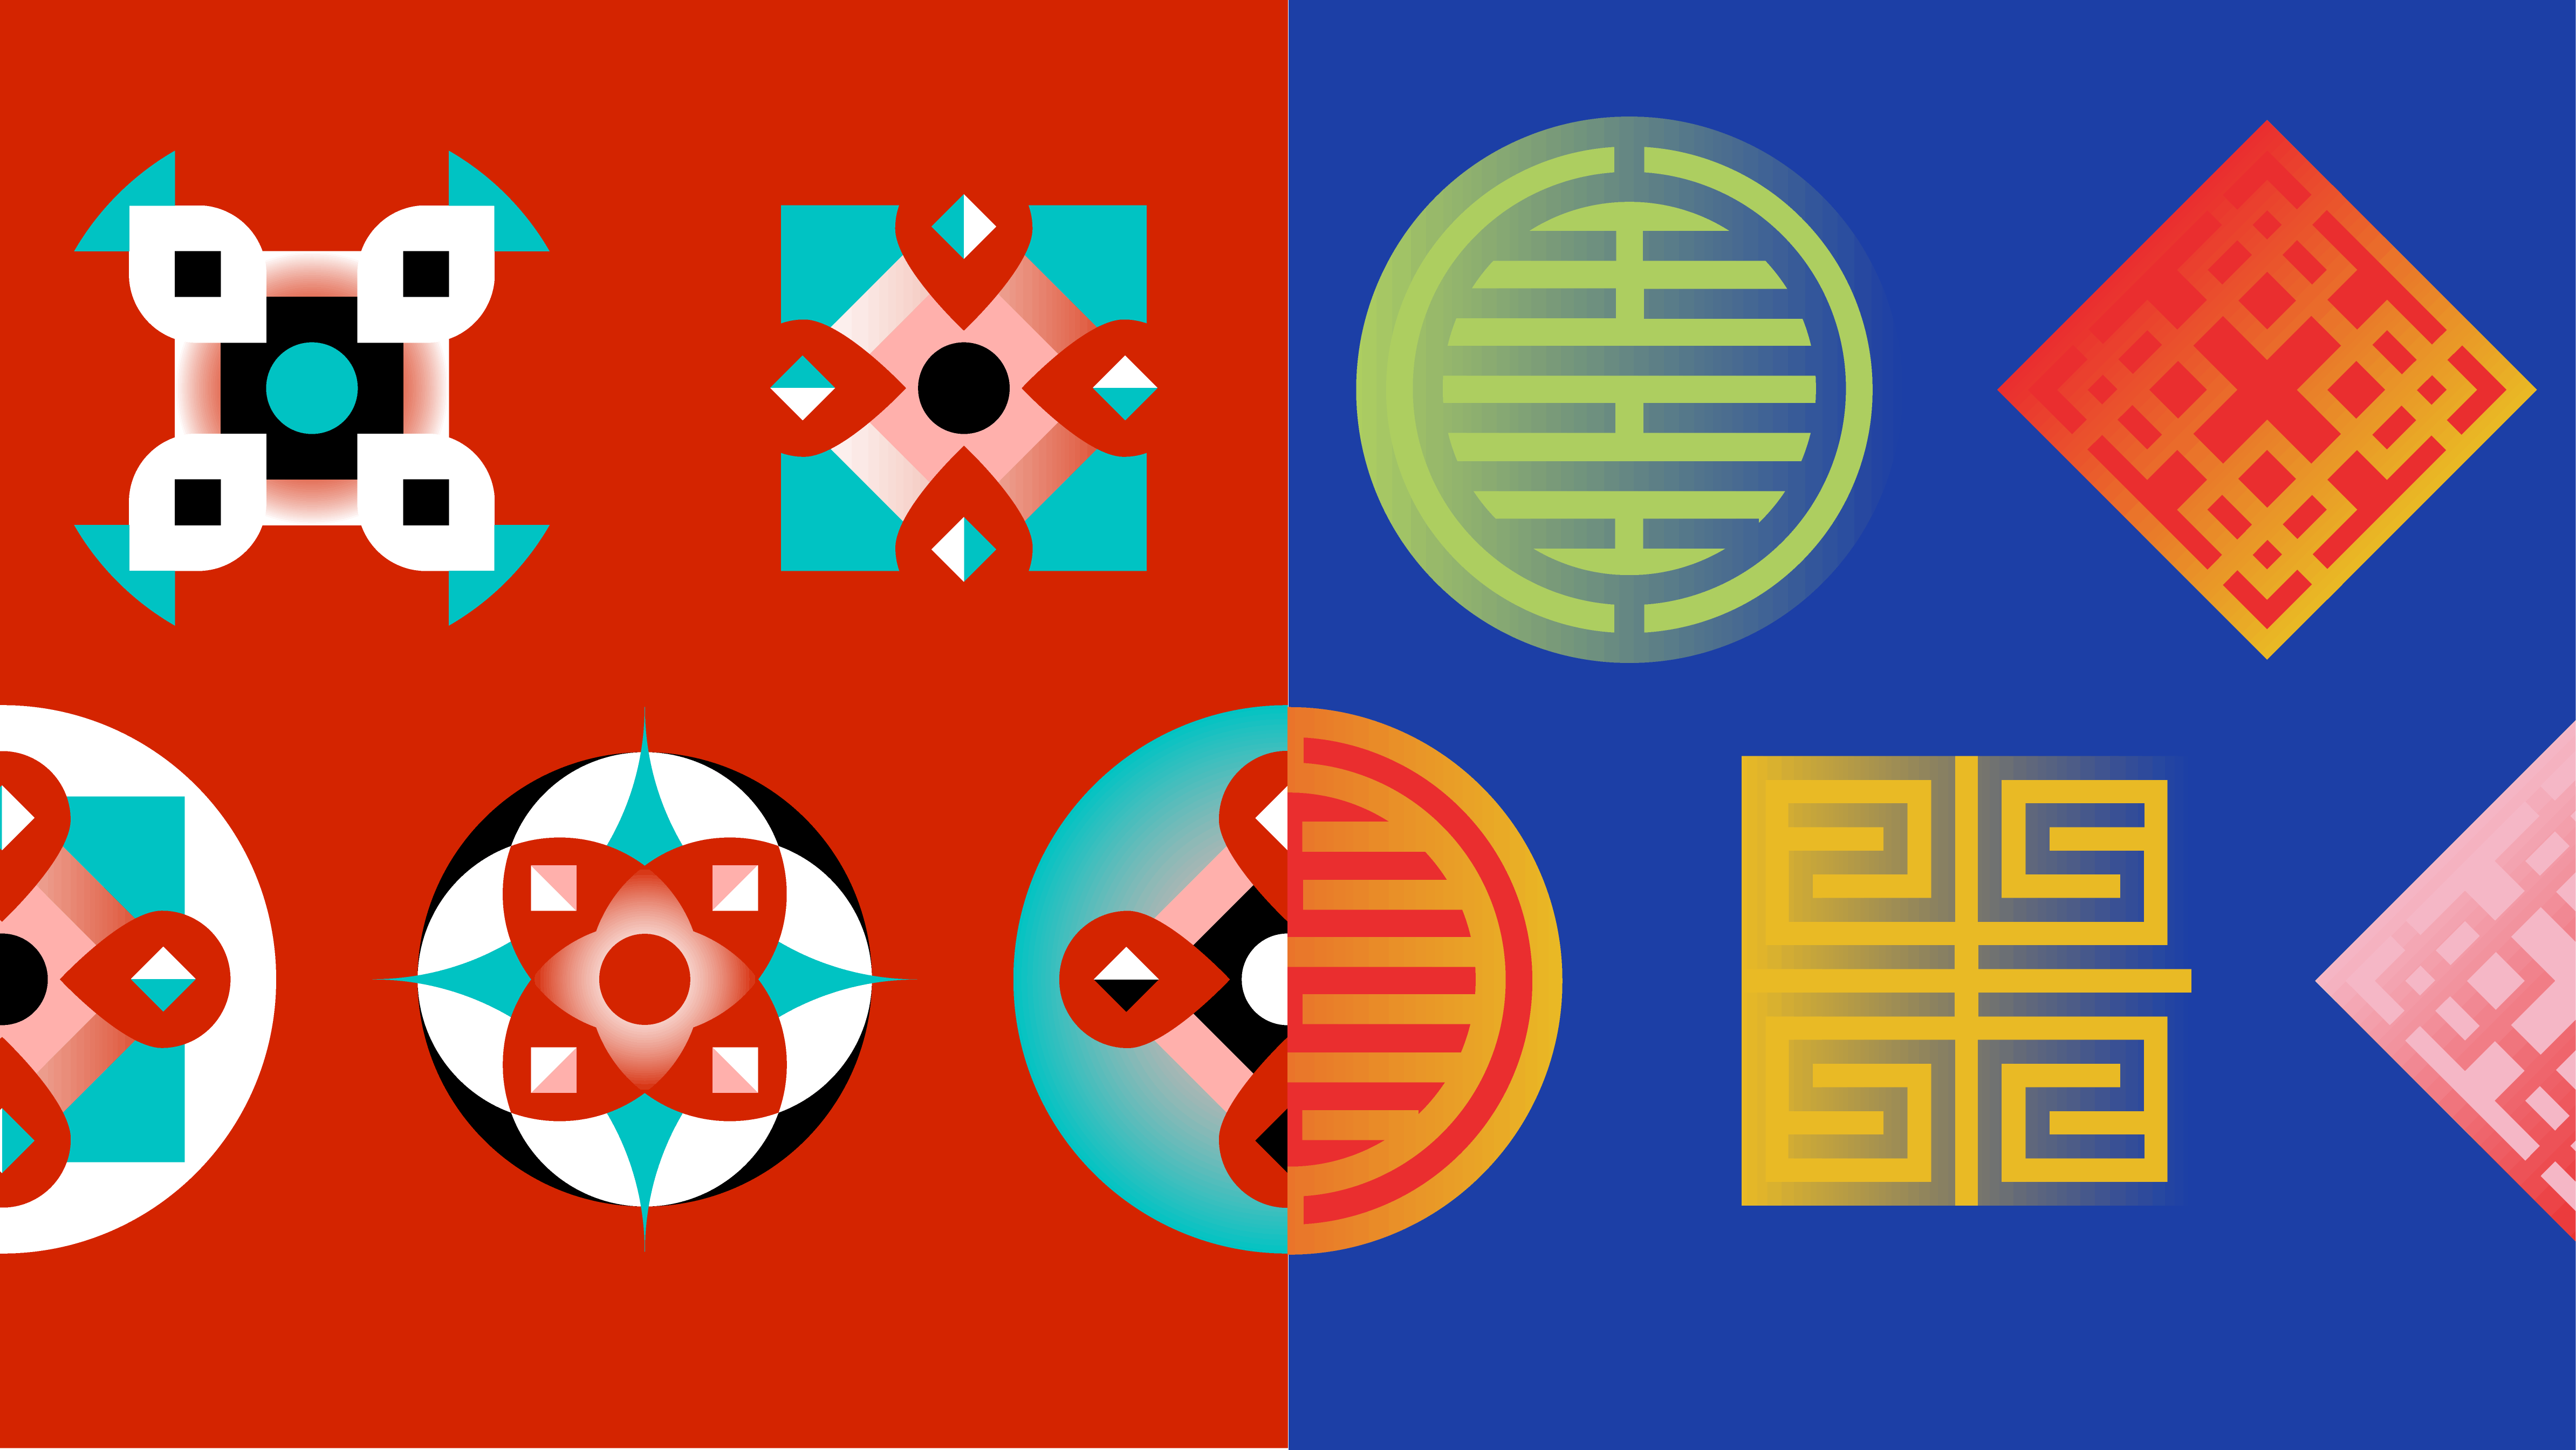 A split digital image displaying the key shapes used for virtual Summits, with Japan on the left and South Korea on the right. The shapes created for the Japan Summit are kaliedoscopic and include red, aqua, peach, black and white and appear on a red background. The shapes created for the South Korea Summit are inspired by the Eight Trigams and the colors include blue, lime green, a yellow-orange, and red and appear on a blue background.